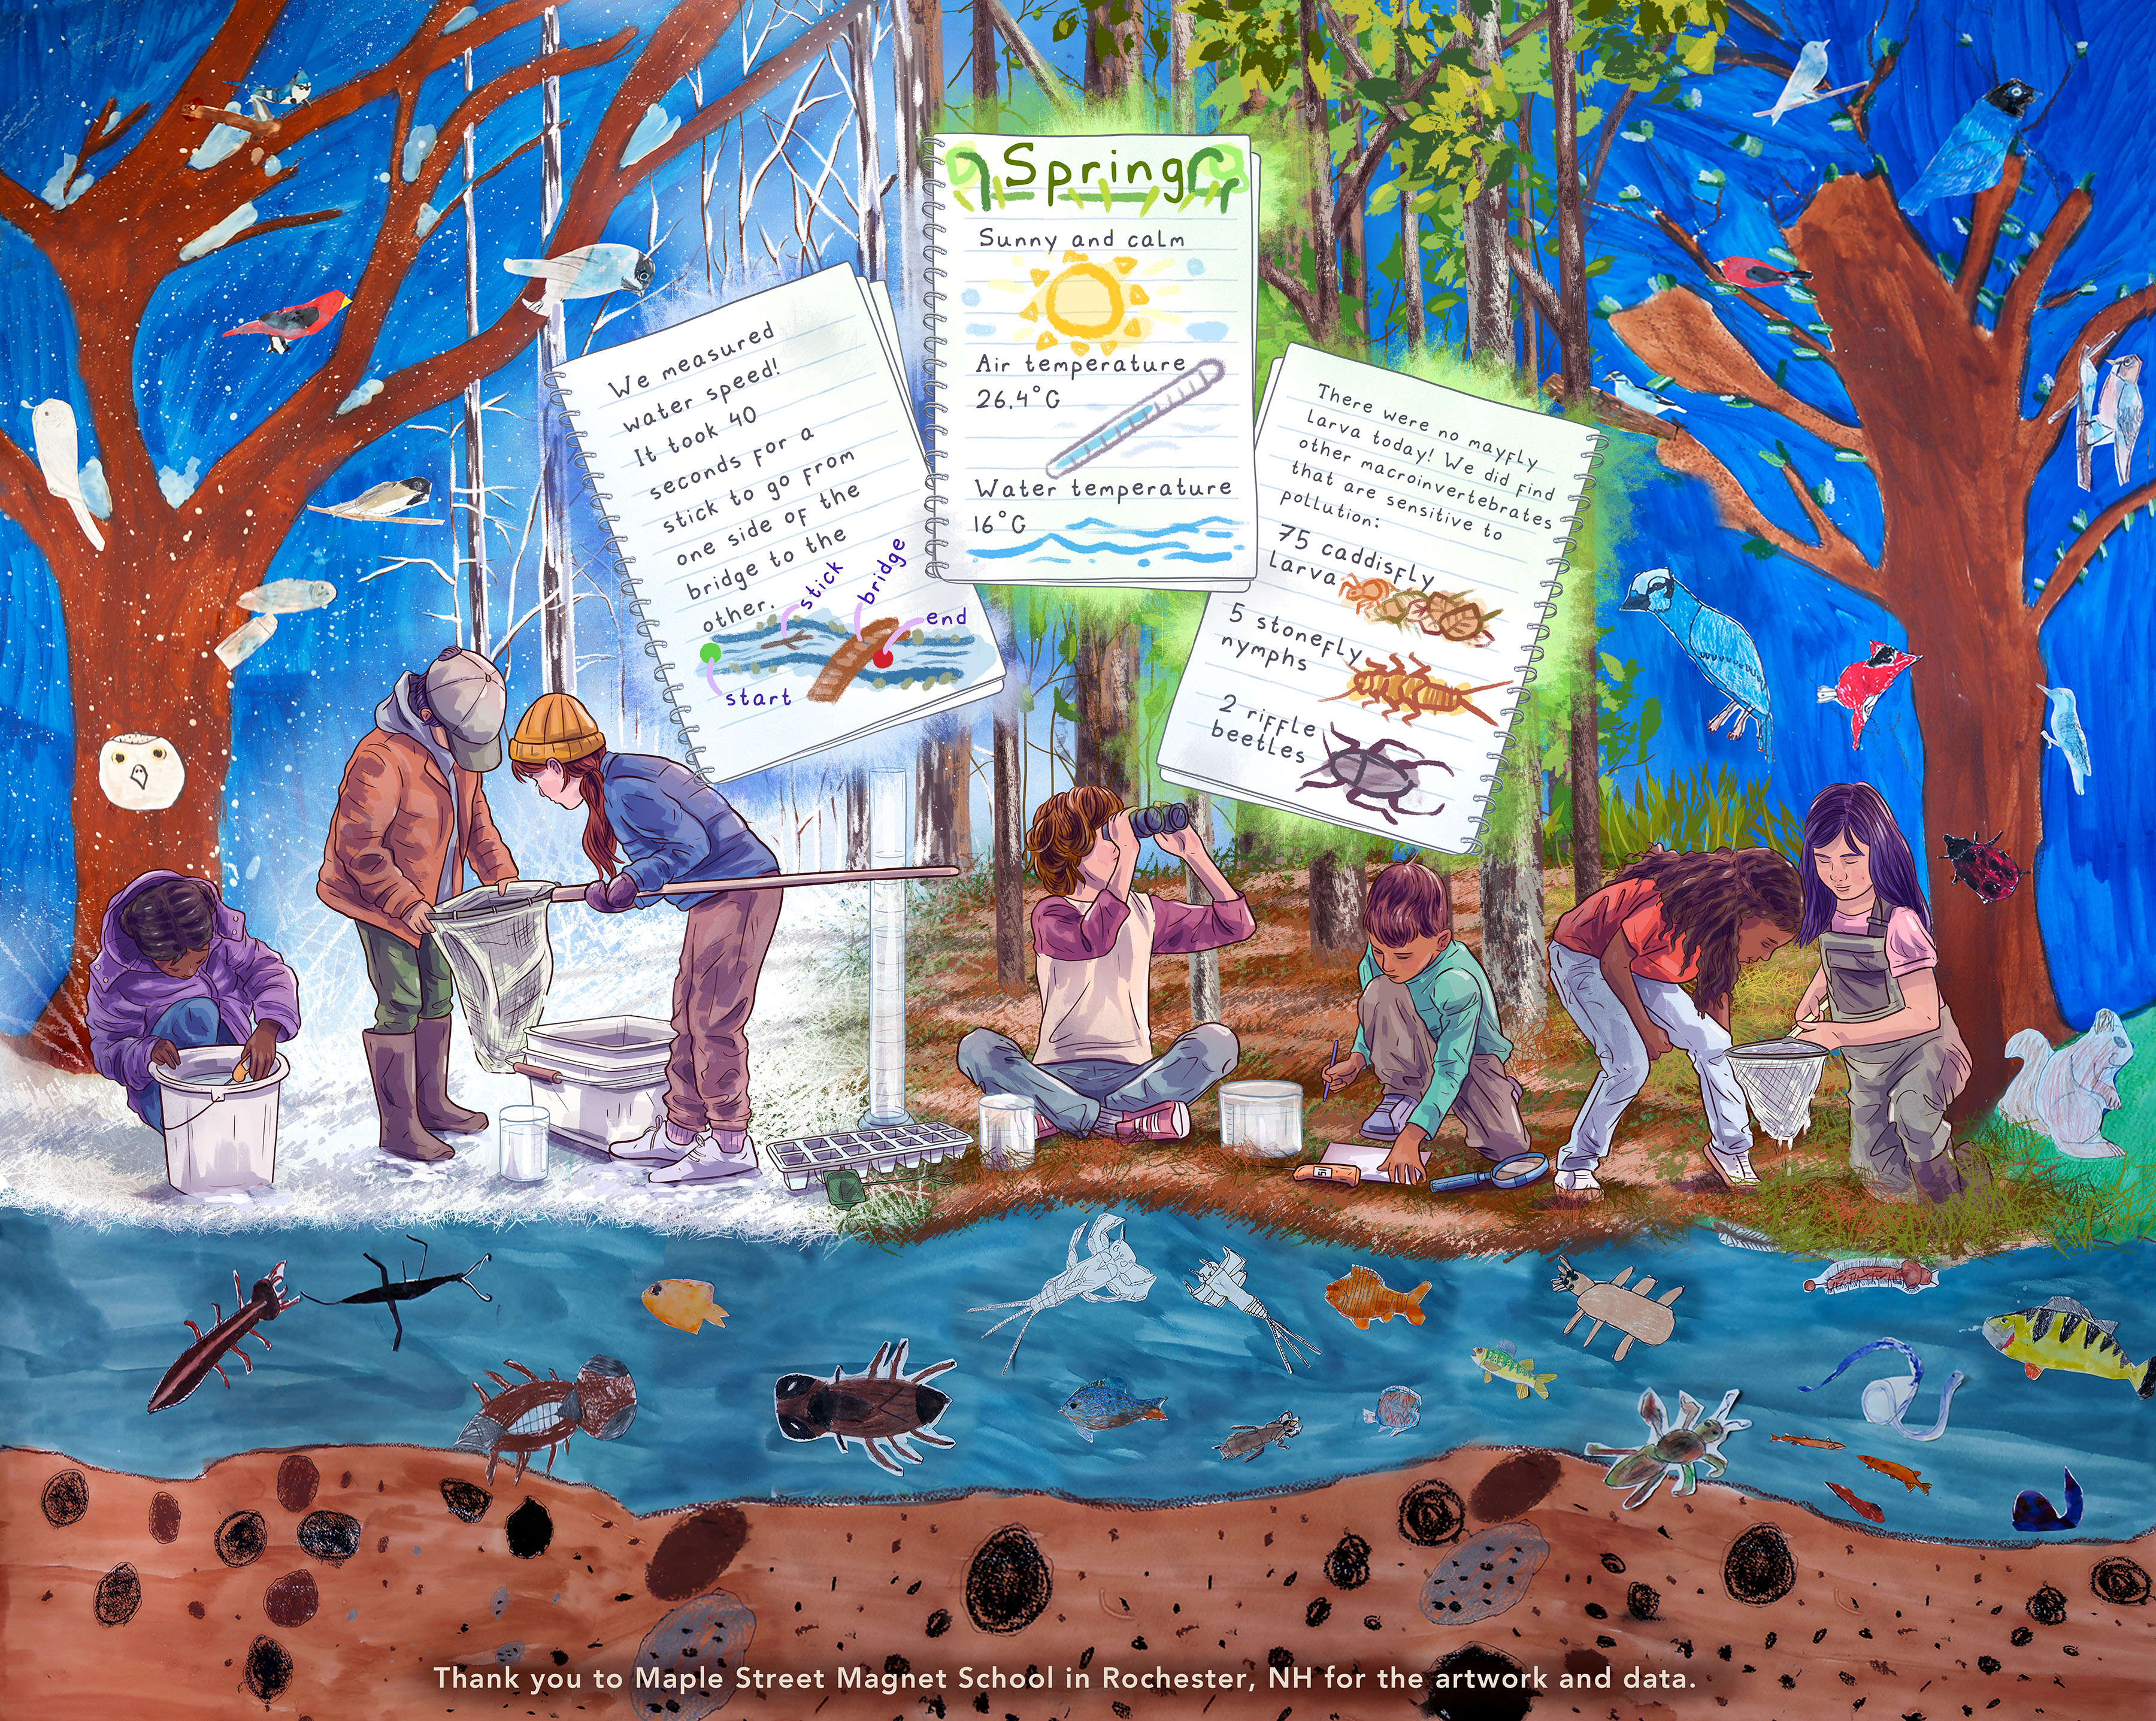 the New Hampshire Water Tent mural for the spring season shows a tree with leaves just emerging, animals in the trees and water, and data sheets with water speed data, weather and water temperature, and macroinvertebrate observations